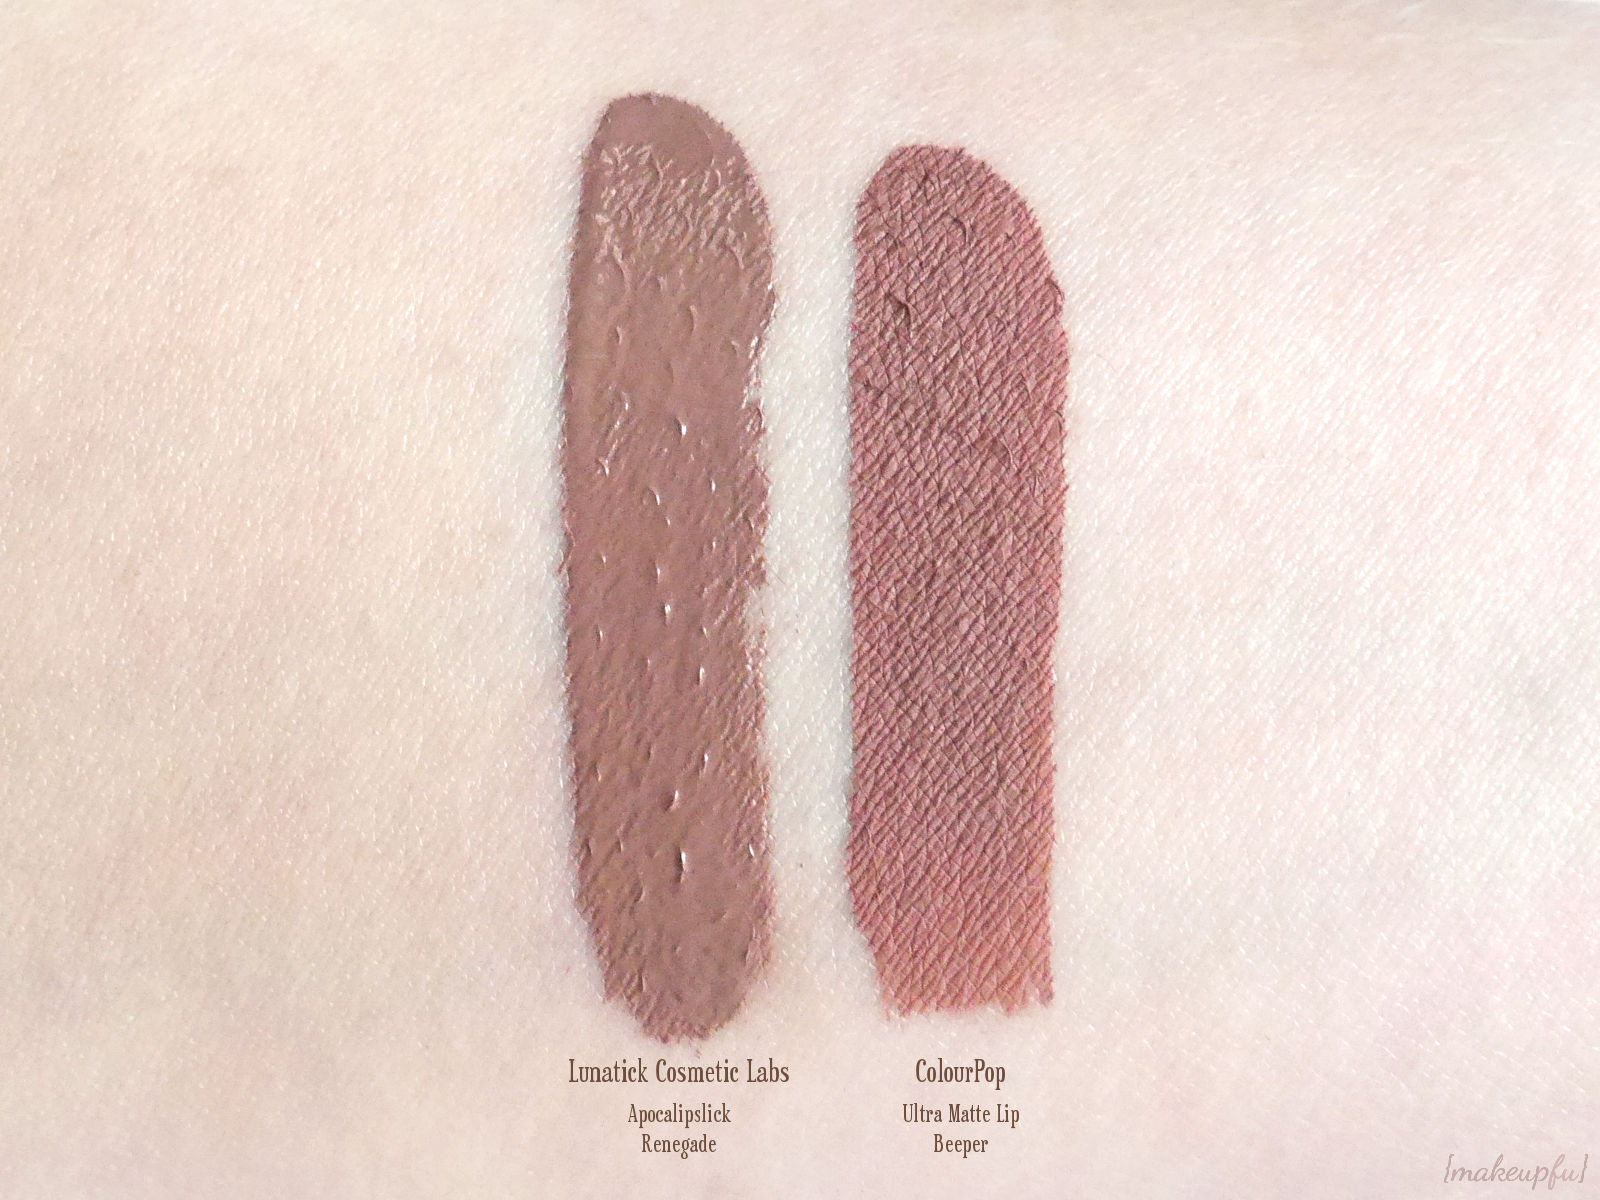 Swatches of Lunatick Cosmetic Labs Apocalipslick in i Renegade/i and Colour...